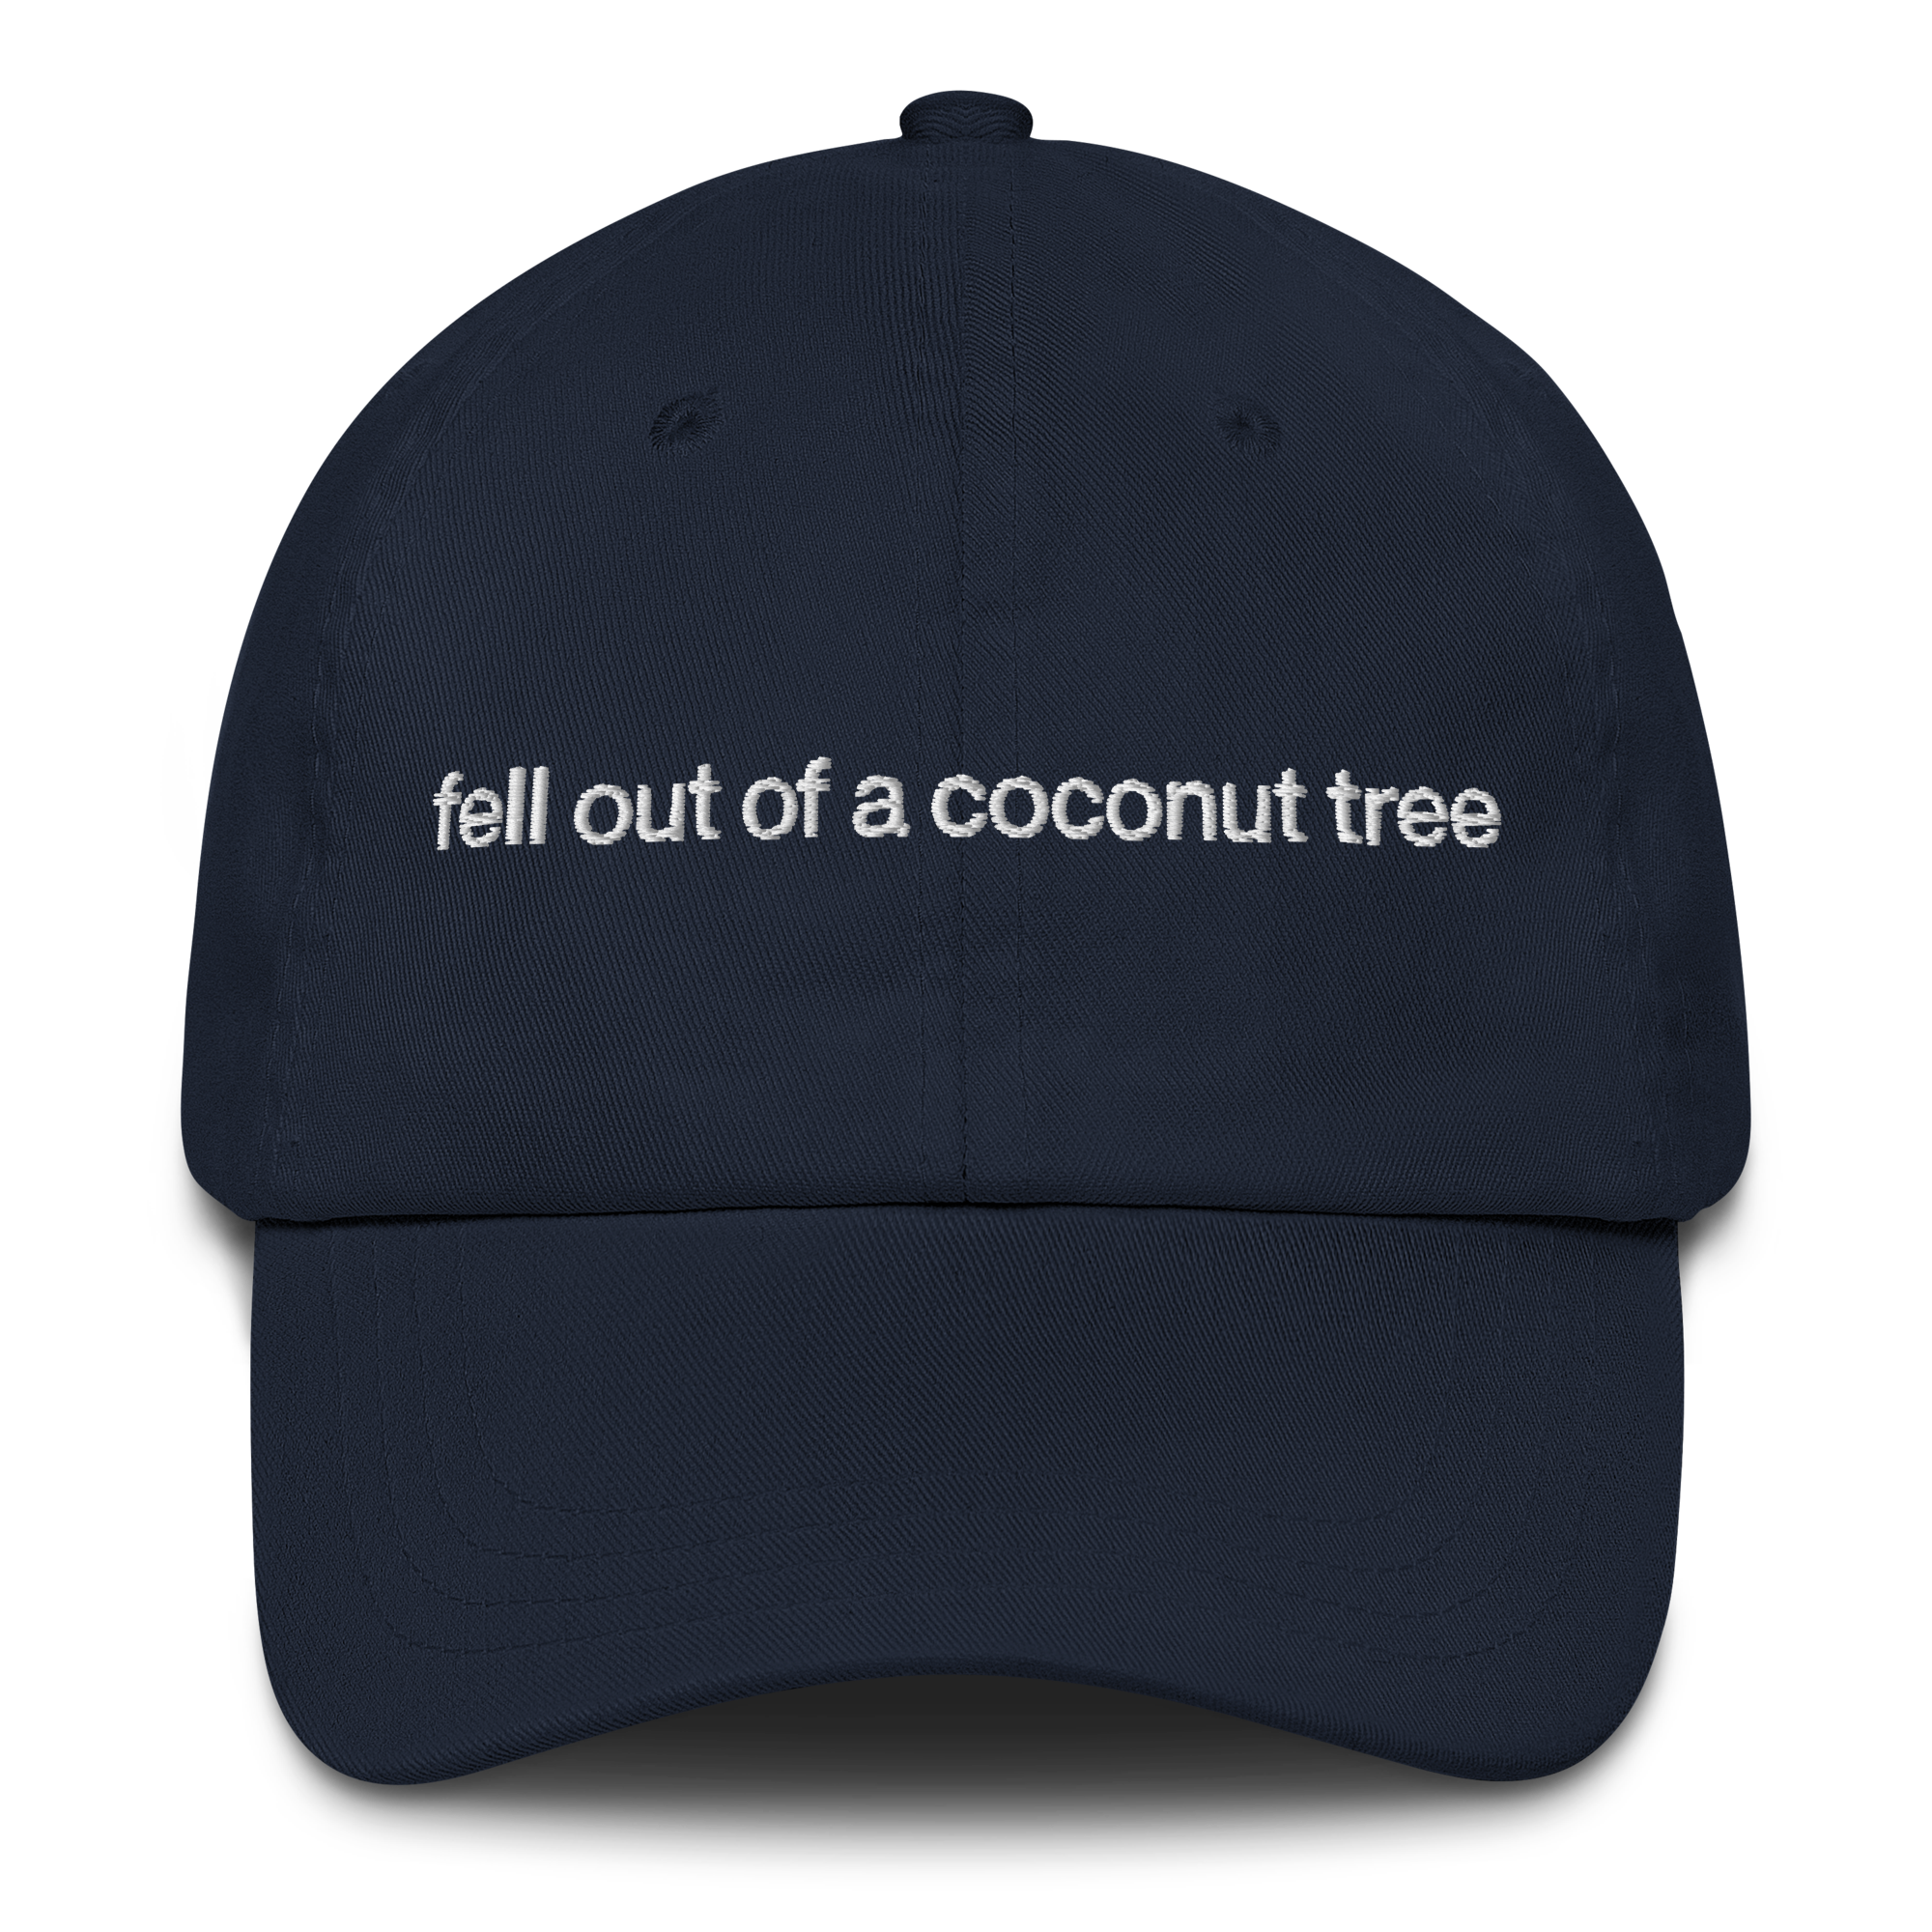 classic-dad-hat-navy-front-669e8590ecbf1.png